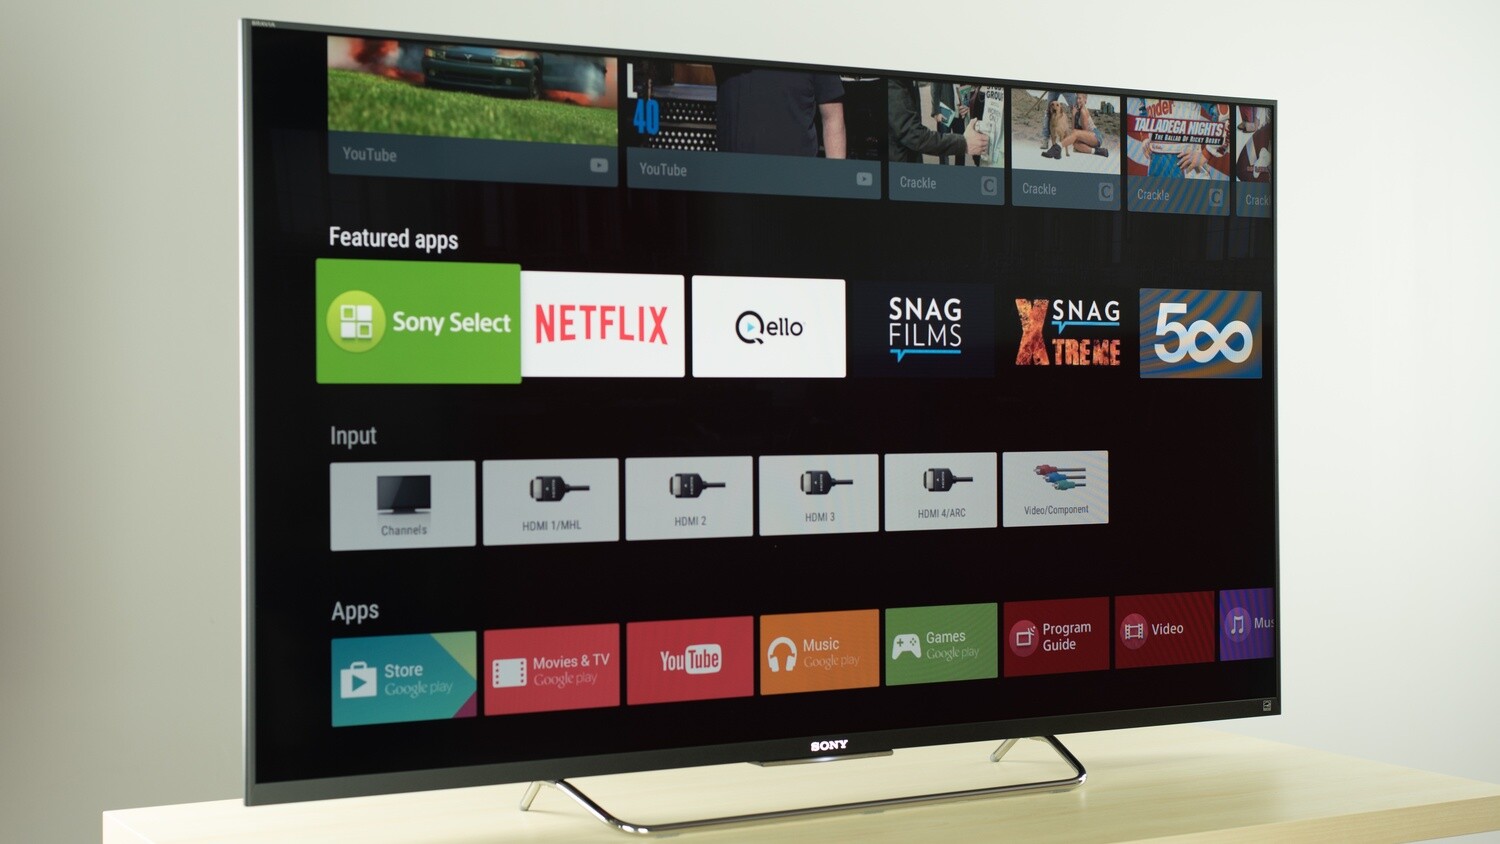 Sony Smart Android LED TV 50" 1080p 120Hz 3D